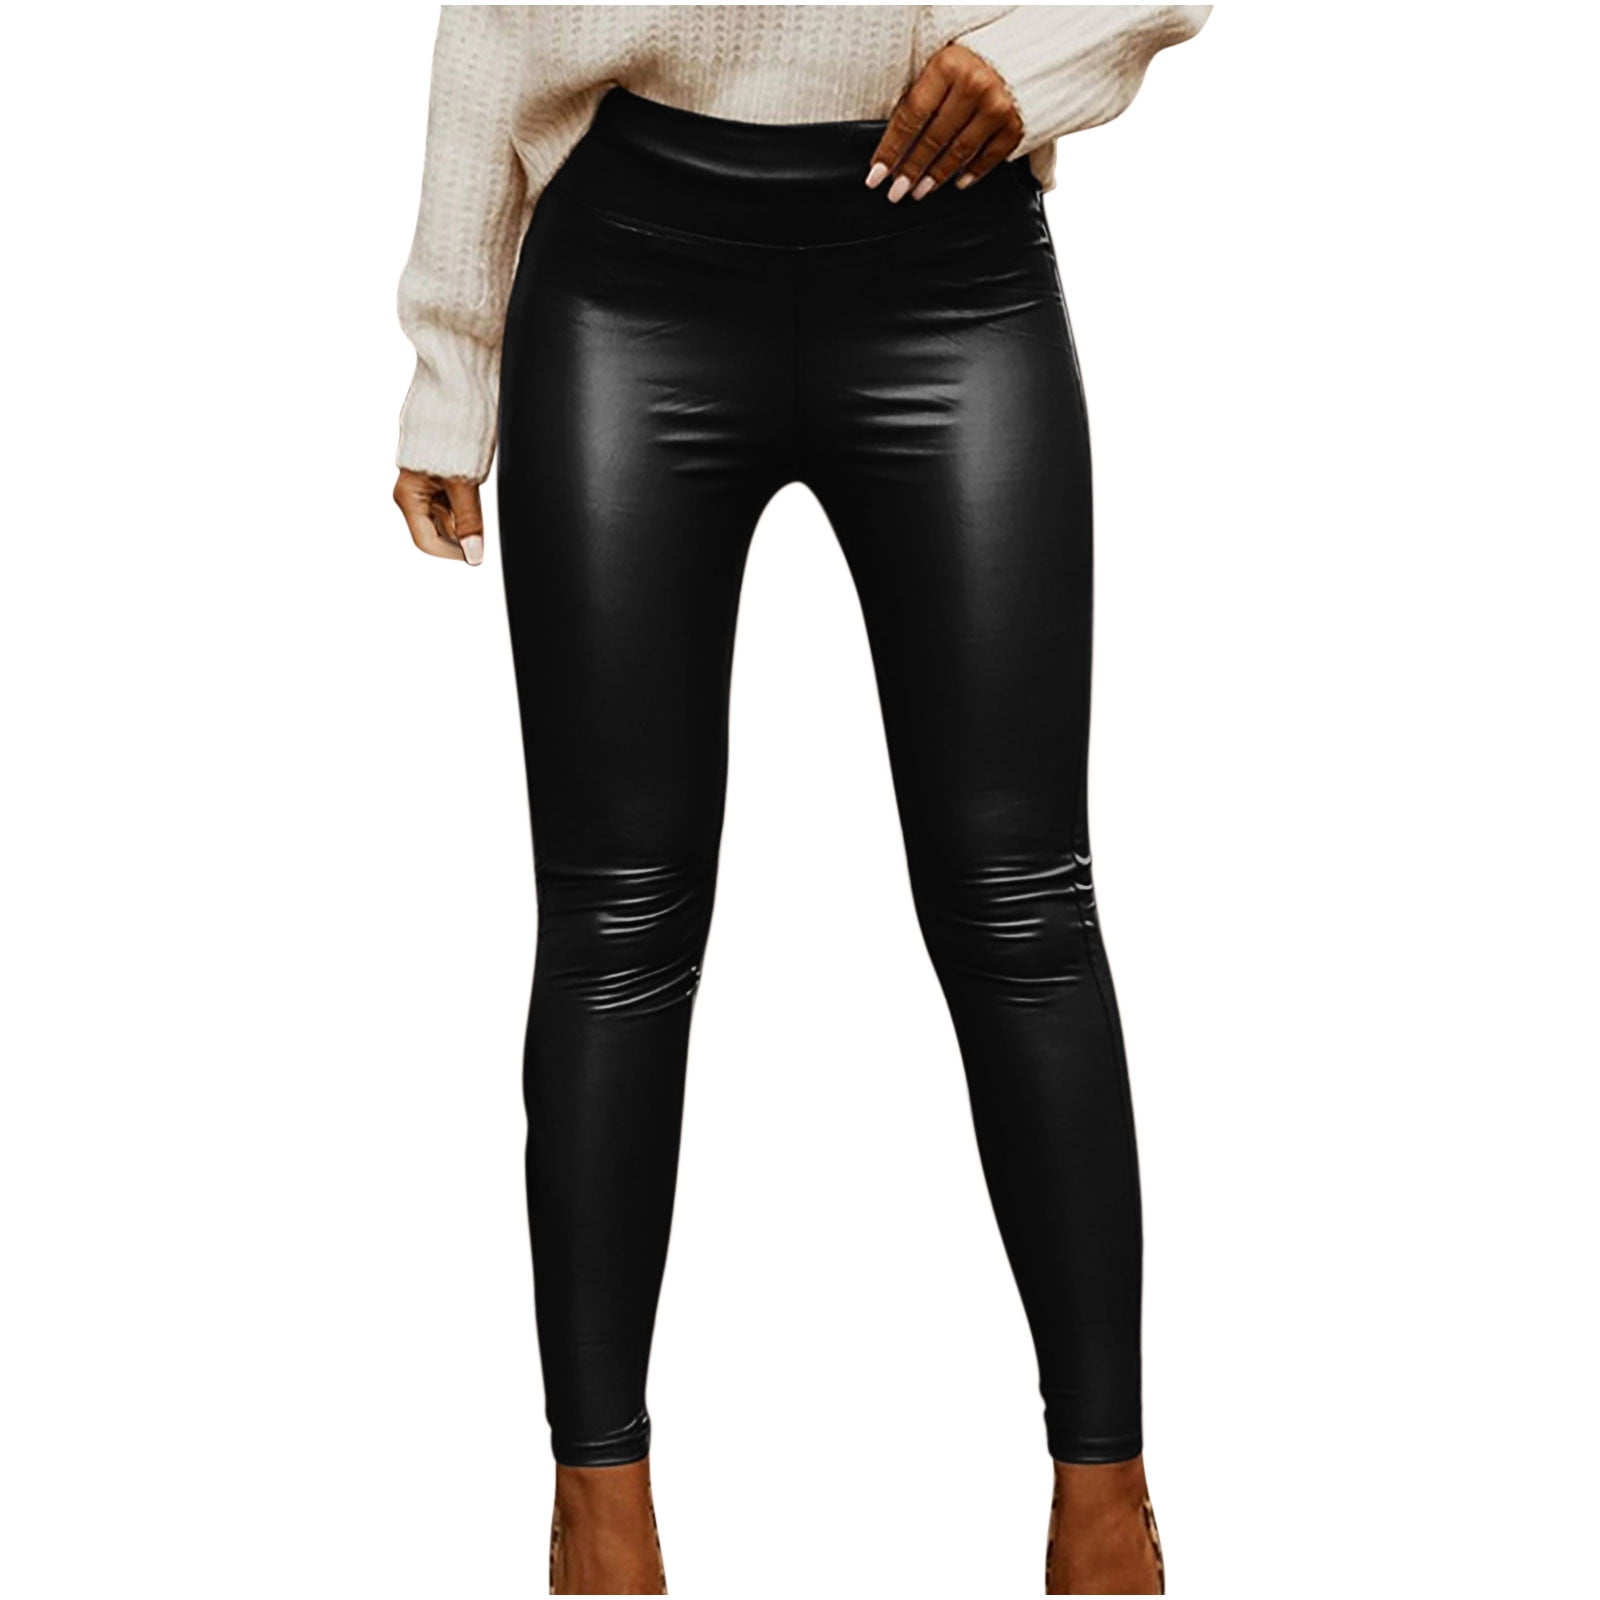 YONGHS Women's Patent Leather Hollowing Out Bottoms Leggings Long